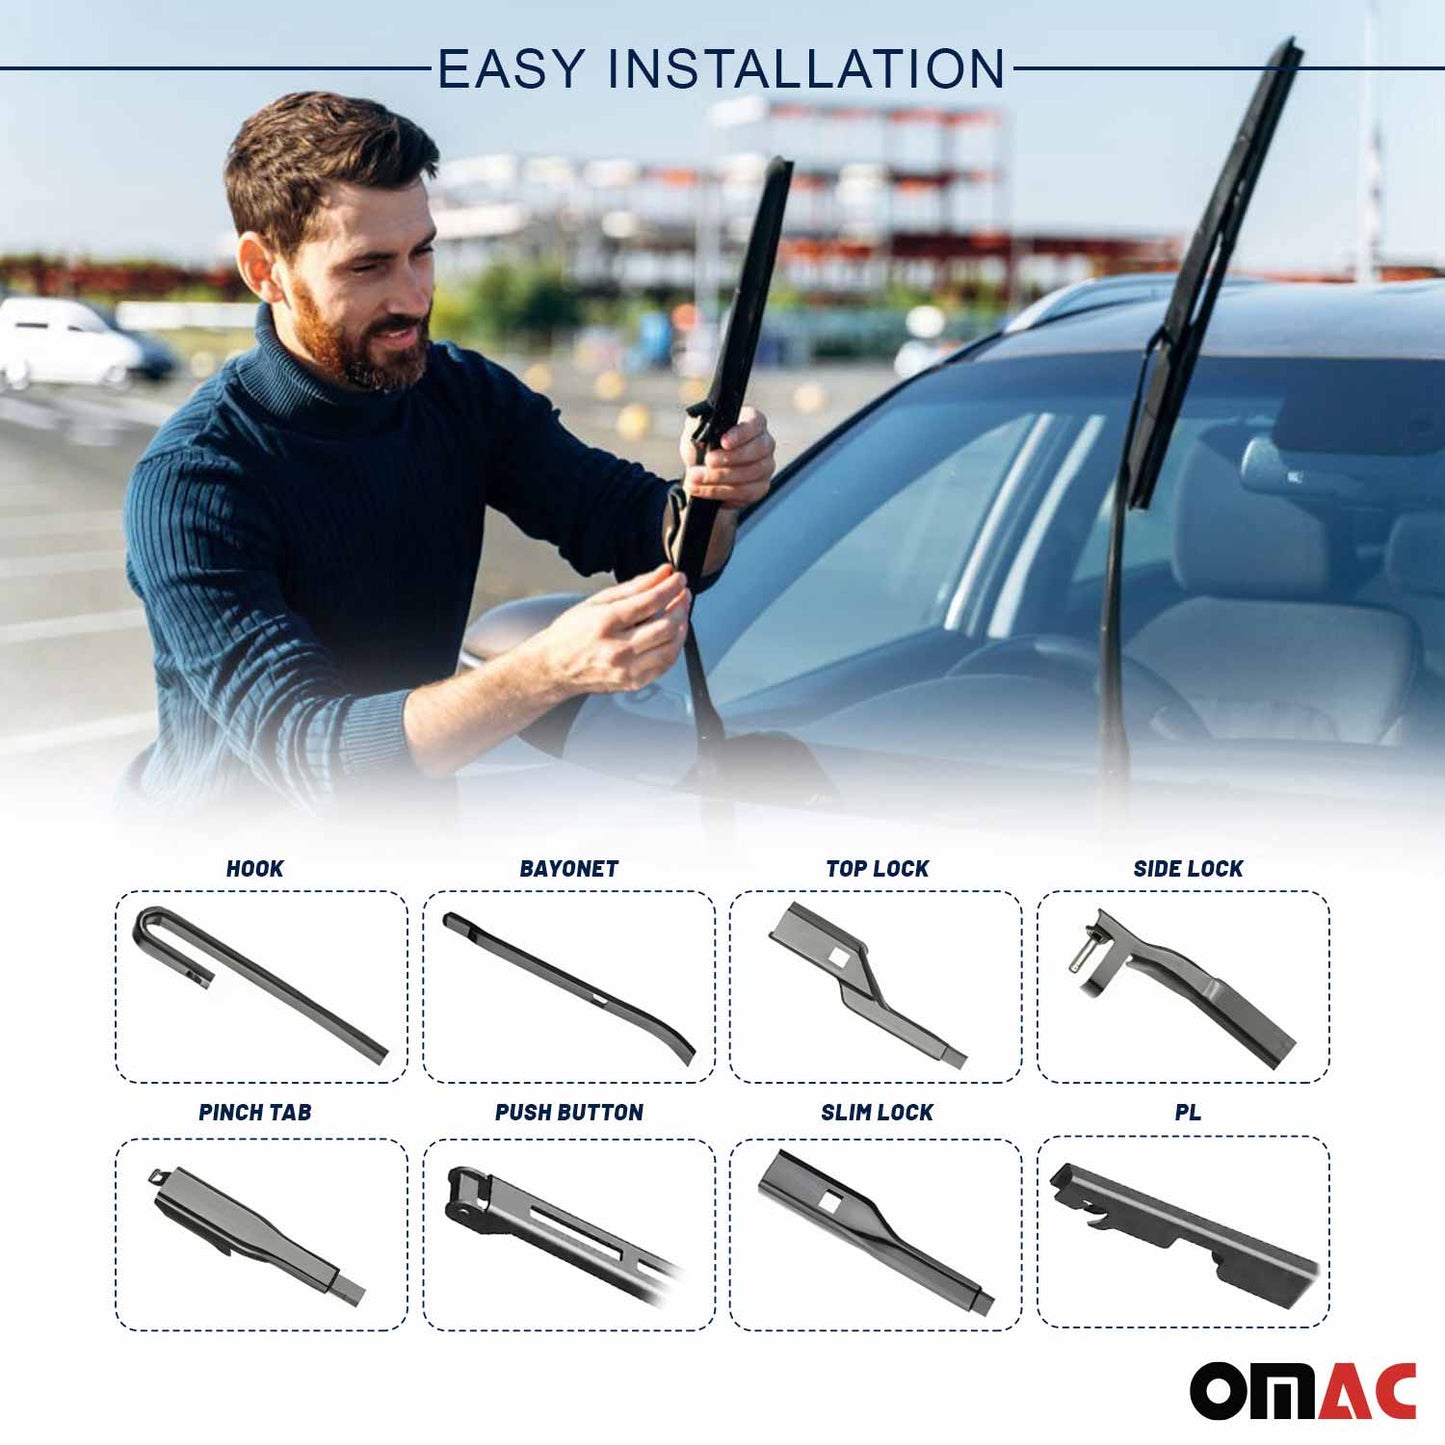 OMAC Front Windshield Wiper Blades Set for Lexus LS430 2001-2006 A046531